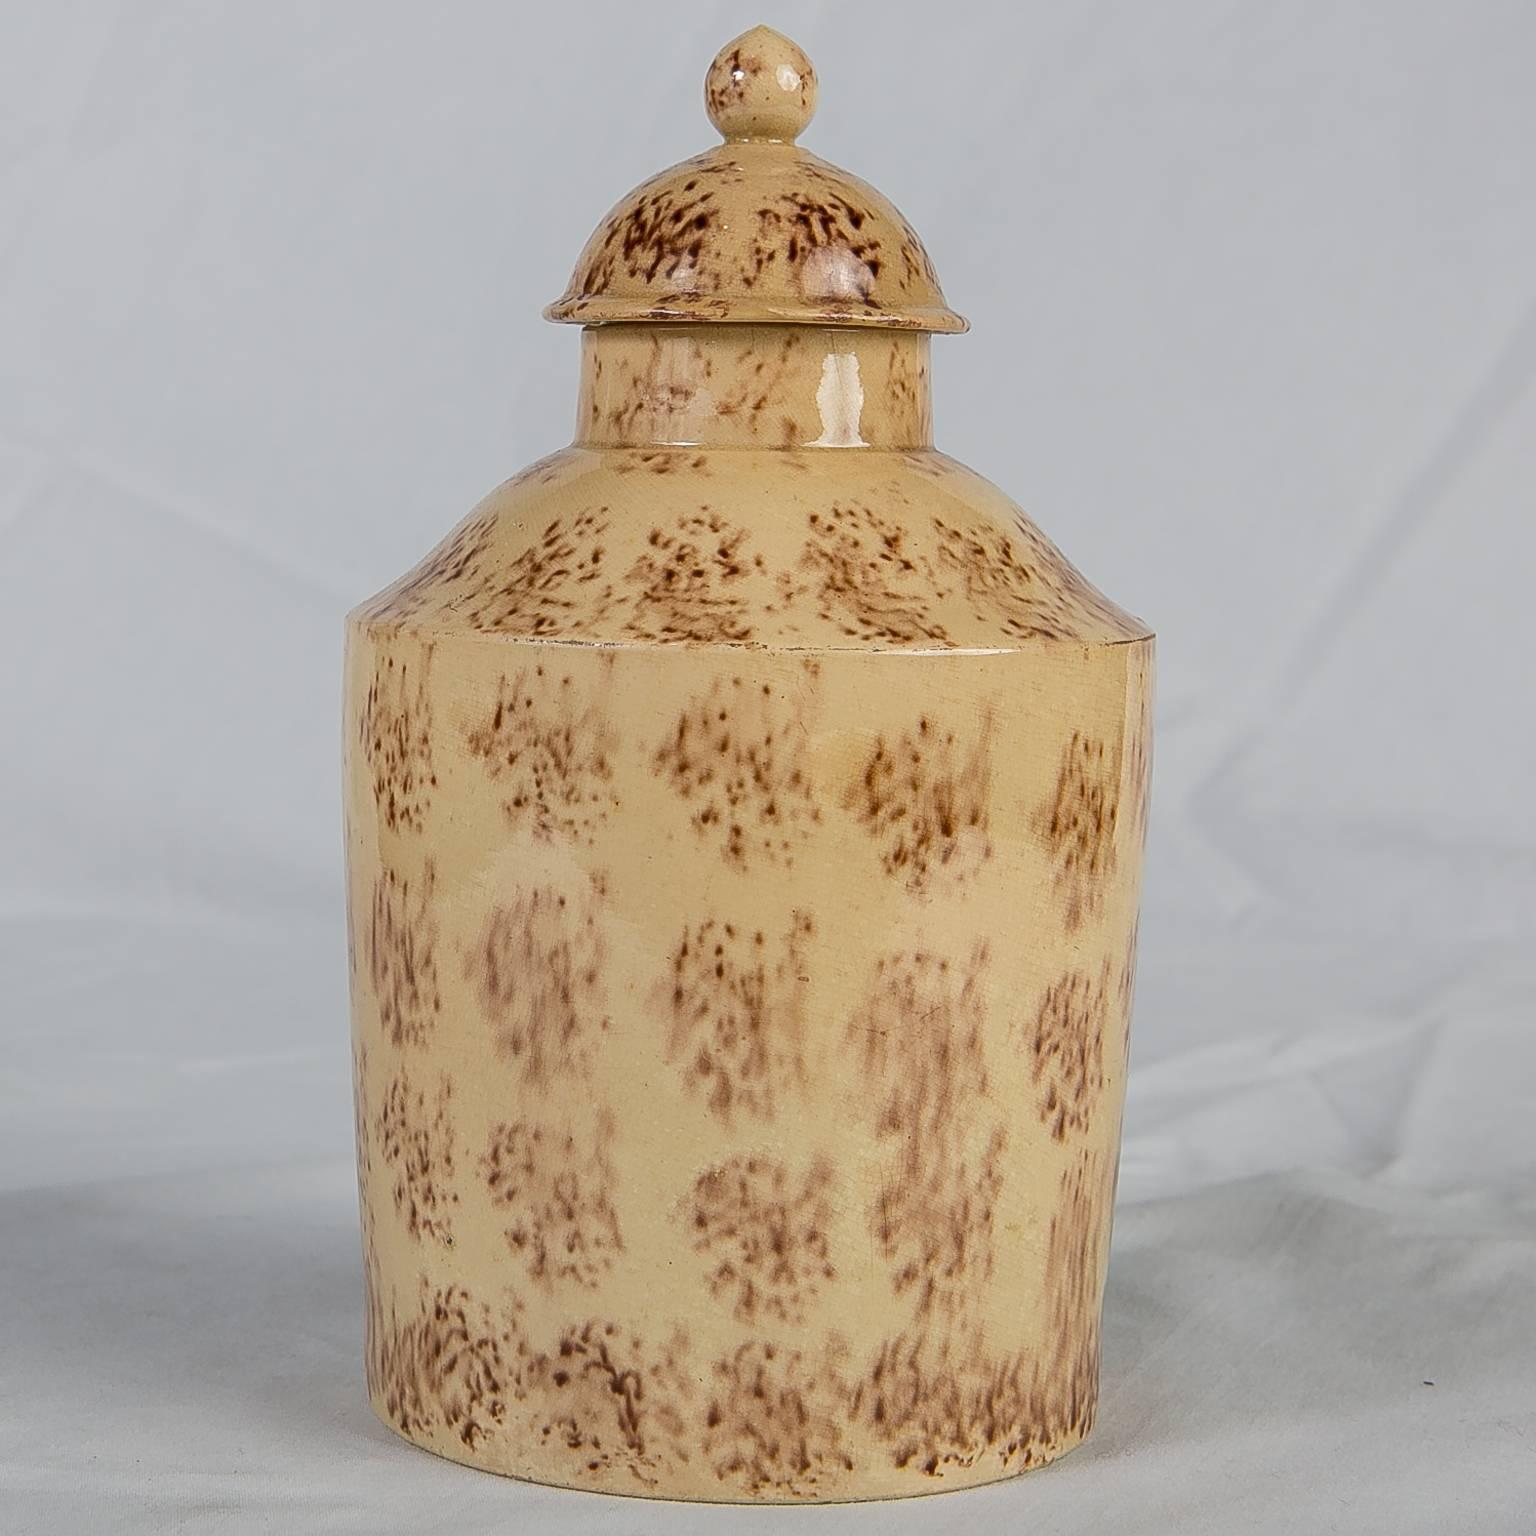 Great Britain (UK) Antique Creamware Tea Caddy with Sponged Decoration